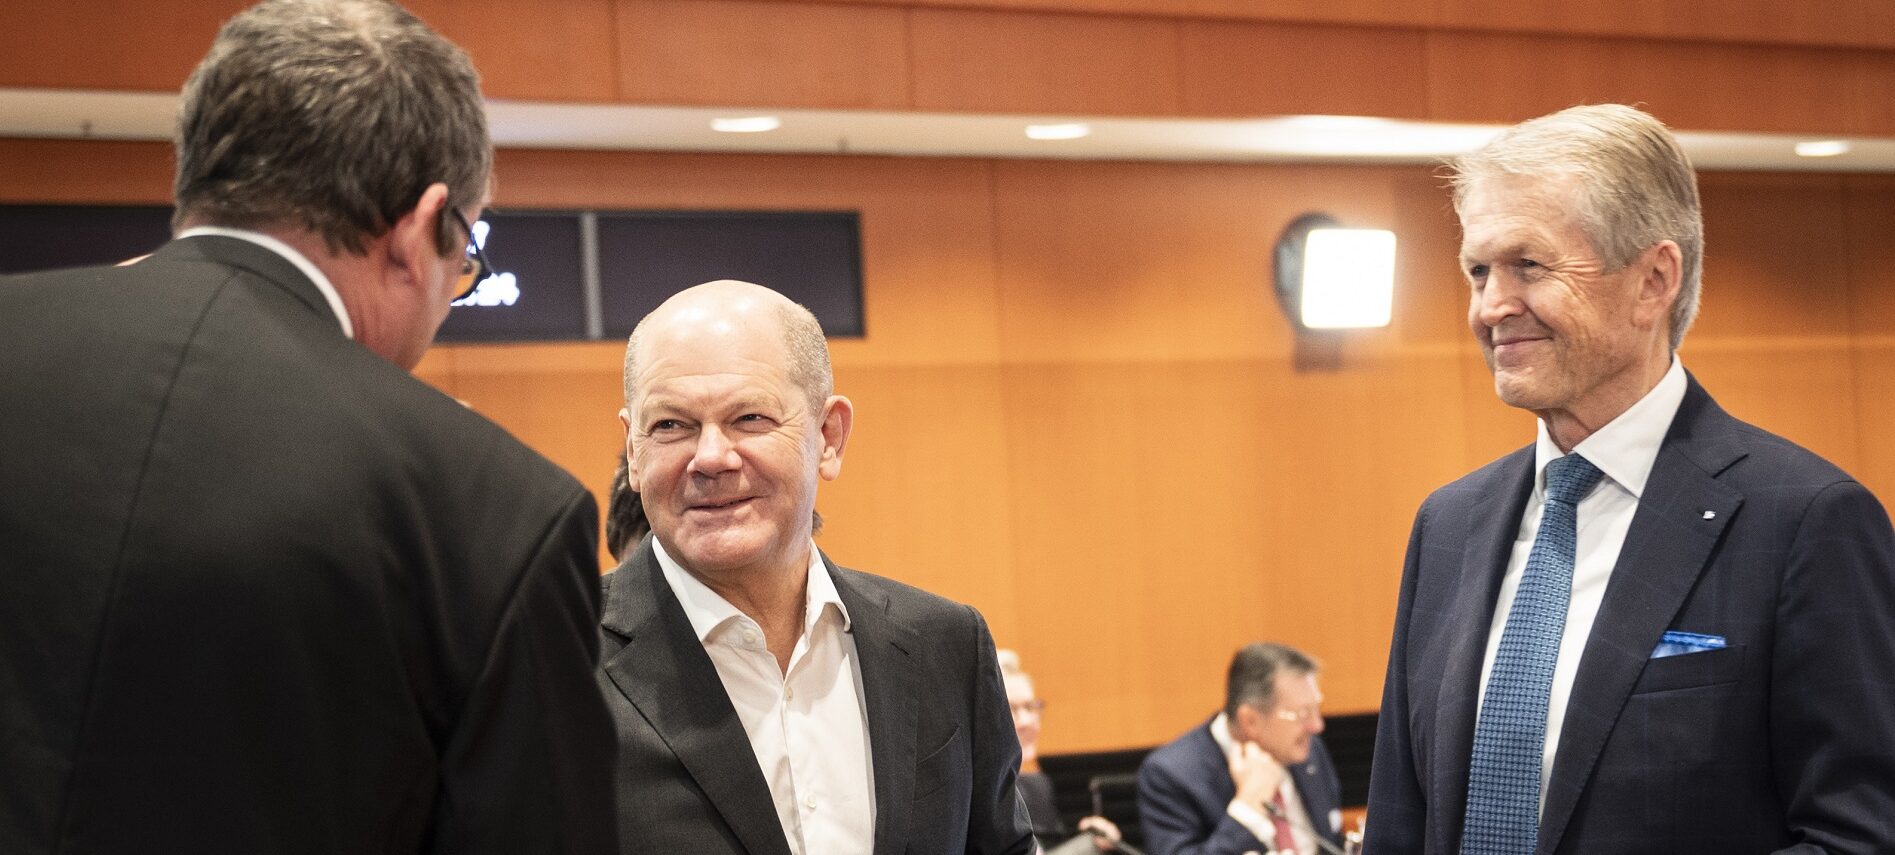 Federal Chancellor Olaf Scholz and acatech President Thomas Weber at the summit of the Alliance for Transformation in the Federal Chancellery